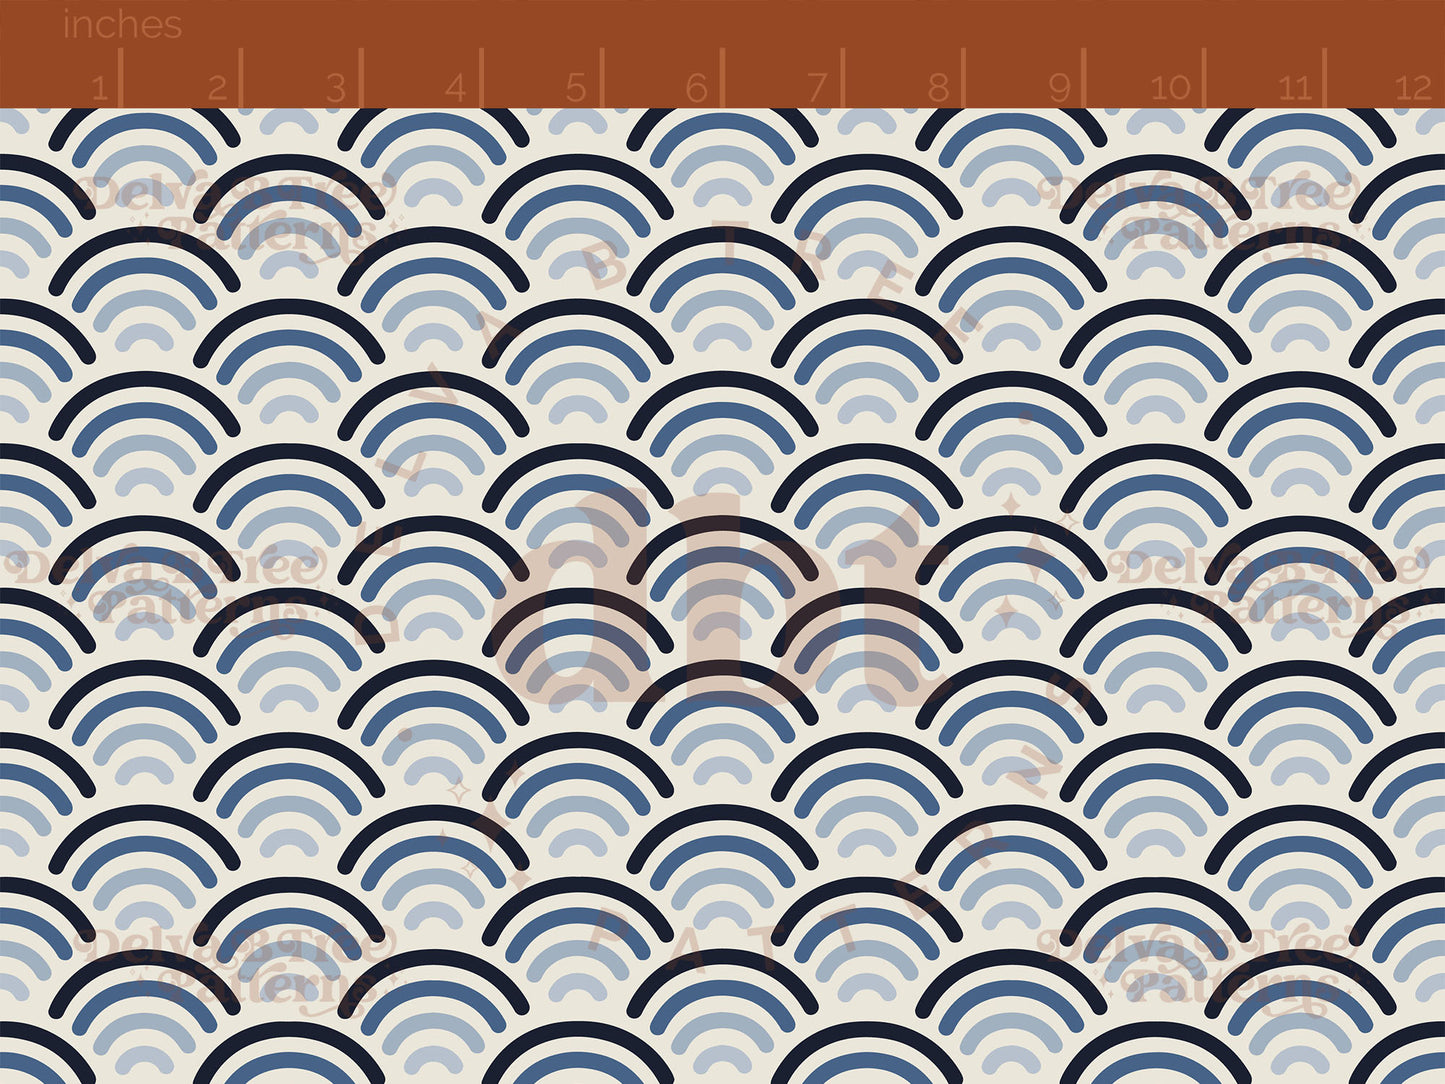 Small blue patriotic summer rainbows on an alabaster / vintage off white background seamless pattern scale digital file for small shops that make handmade products in small batches.